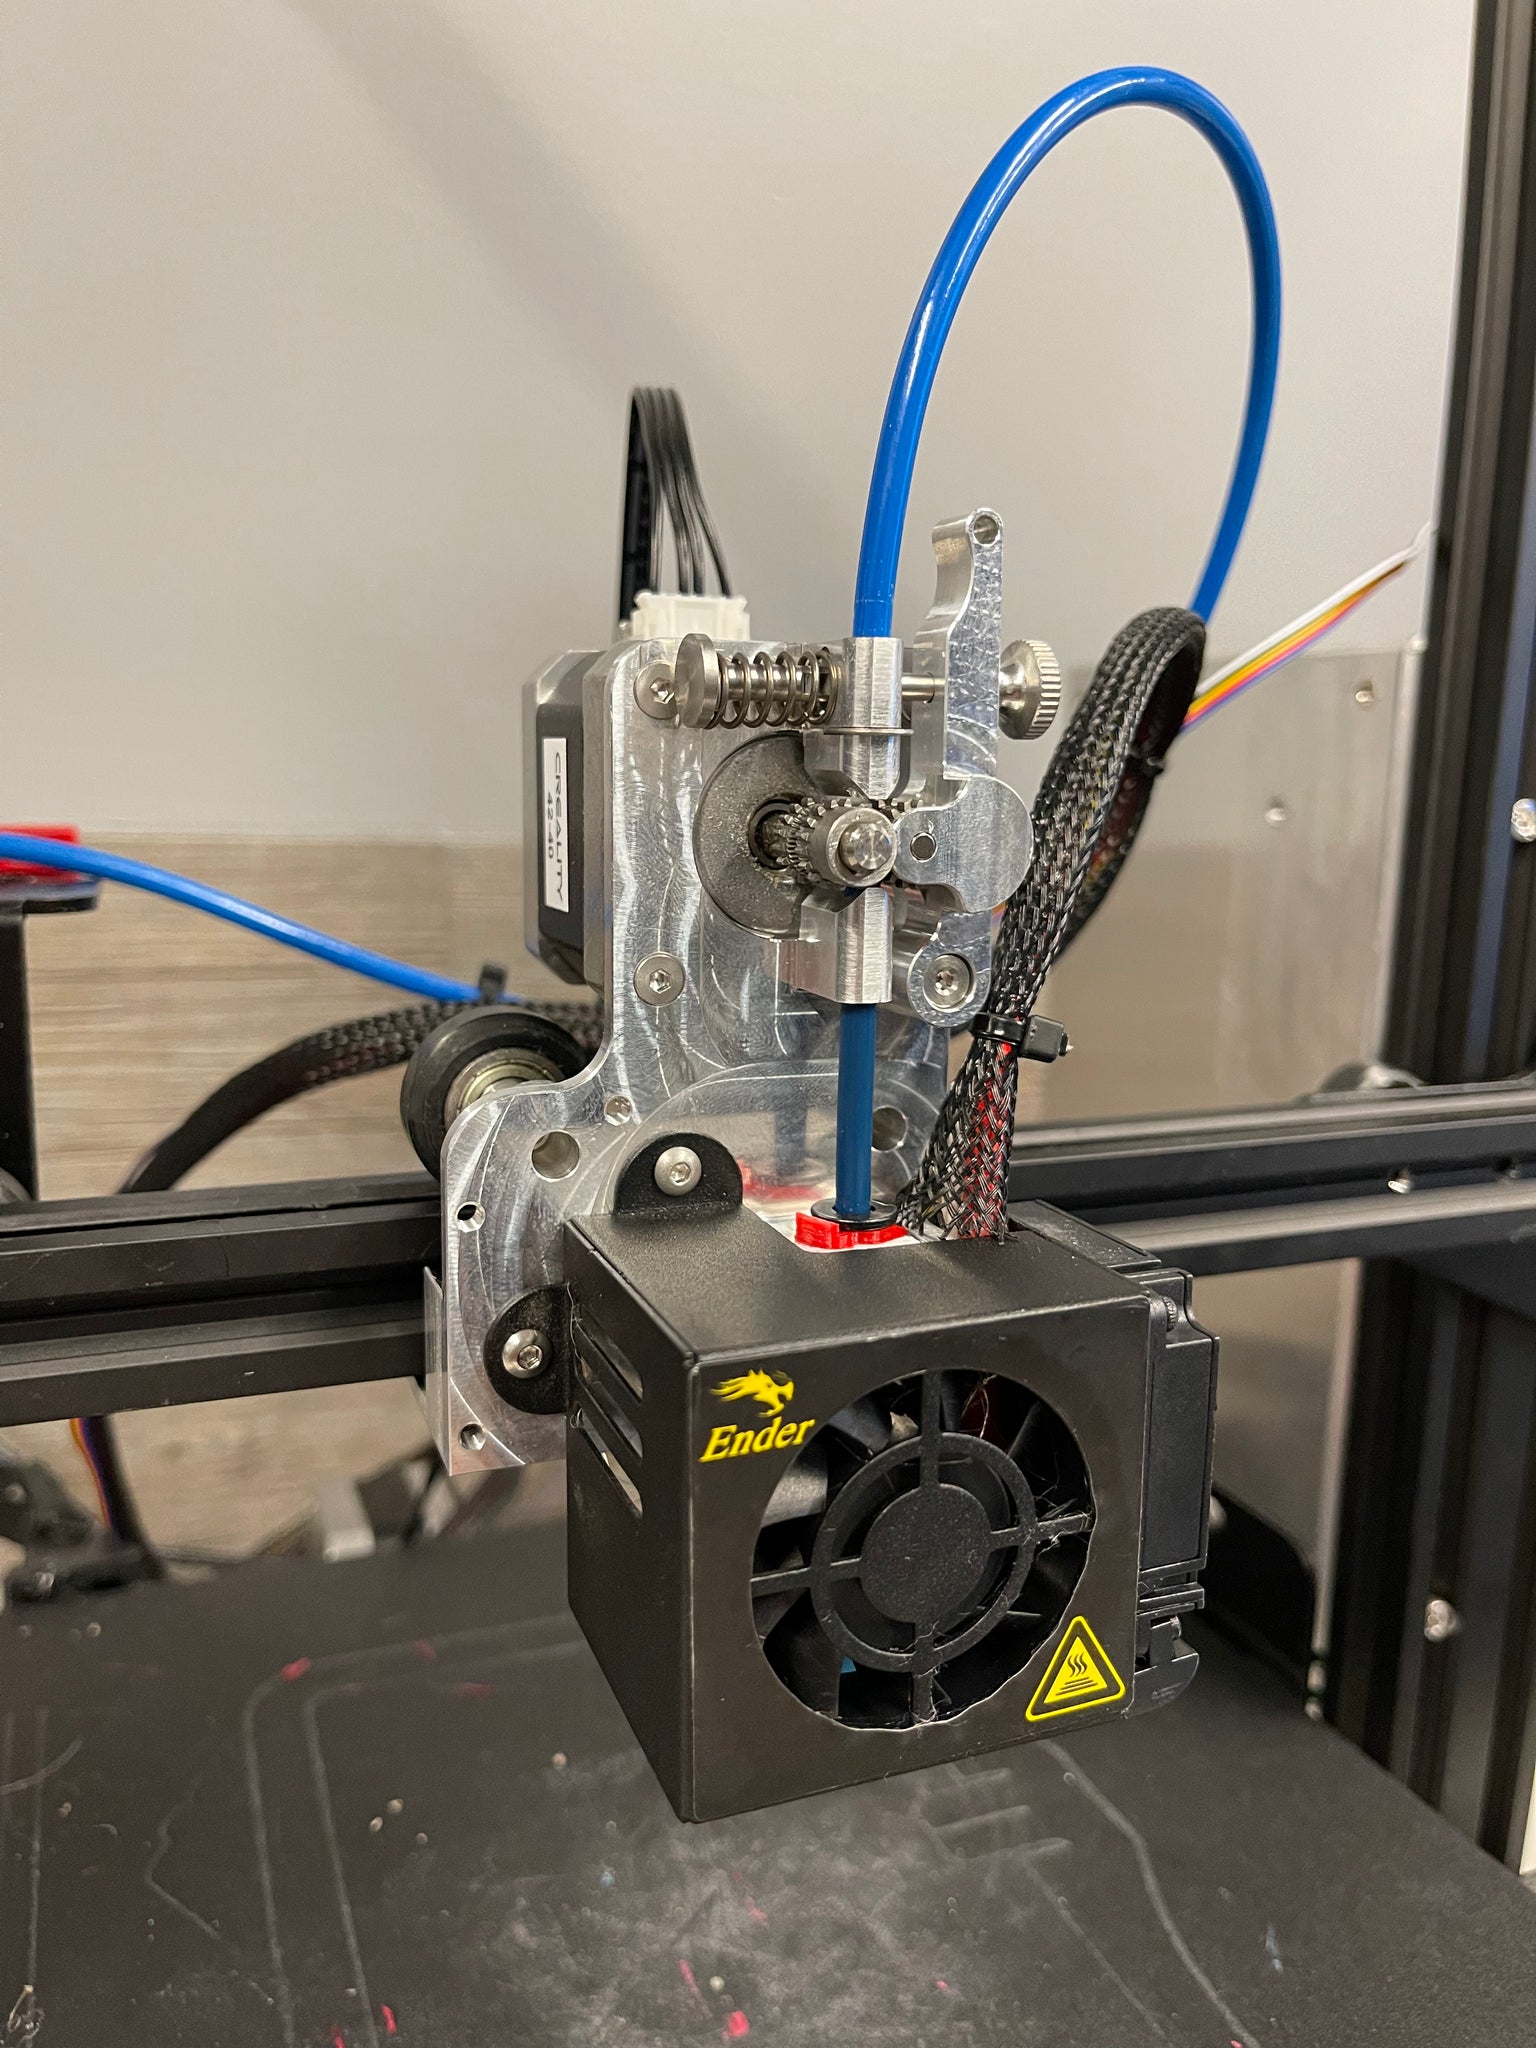 Direct Drive Extruder for Creality CR-10 & Ender 3